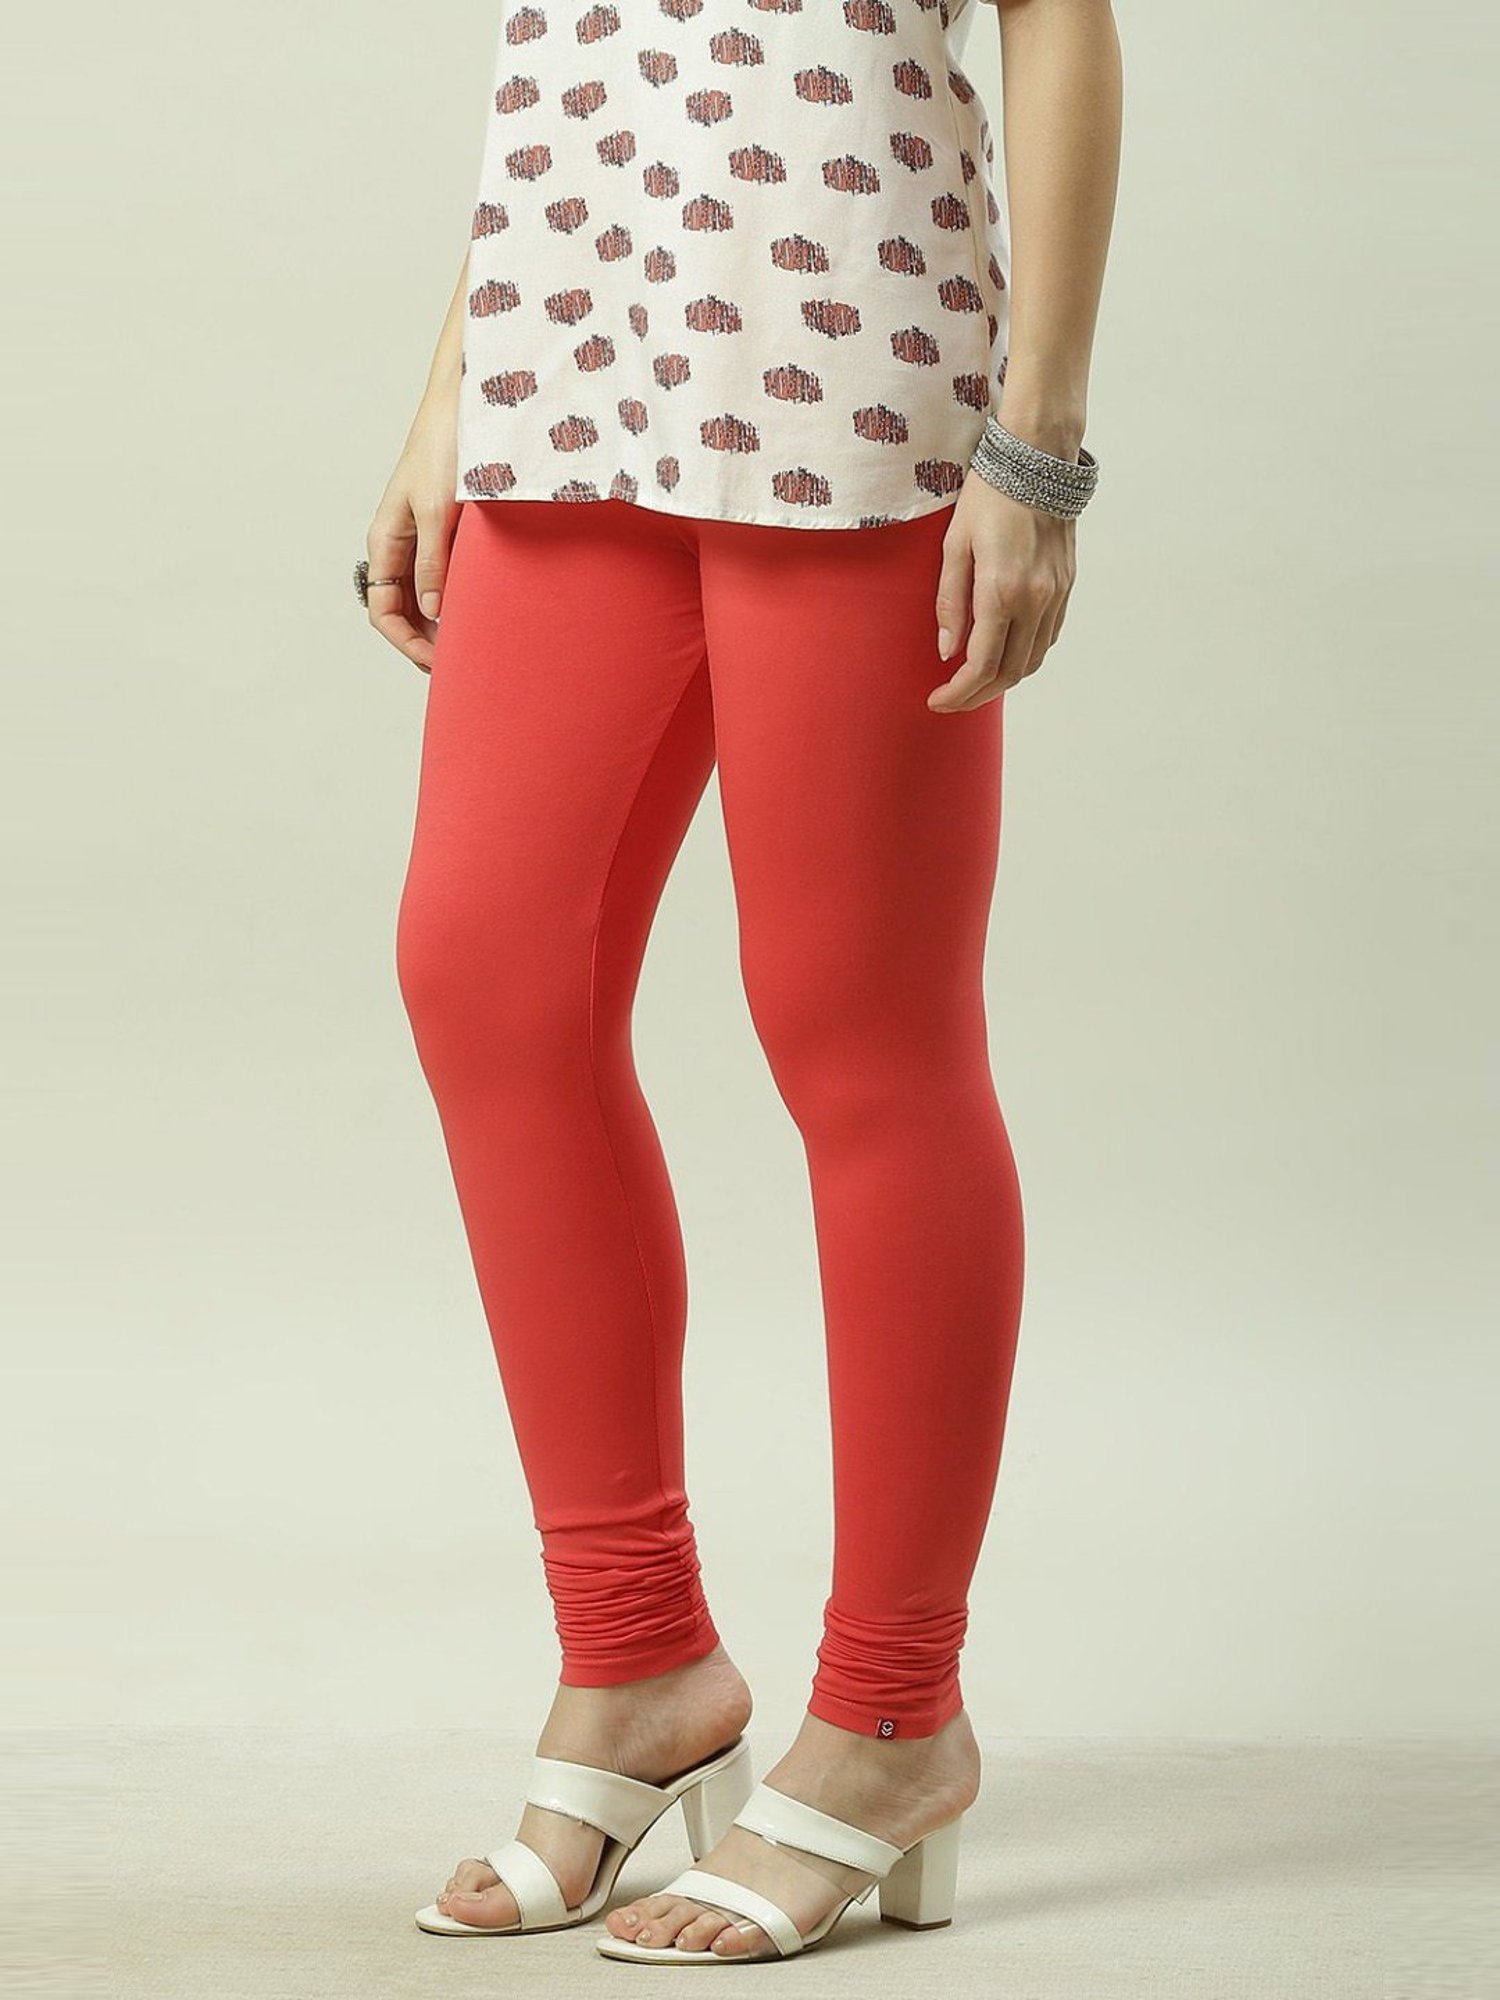 New arrivals in Bottoms and Ethnic Indian wear for women and Latest Bottoms  at Biba India